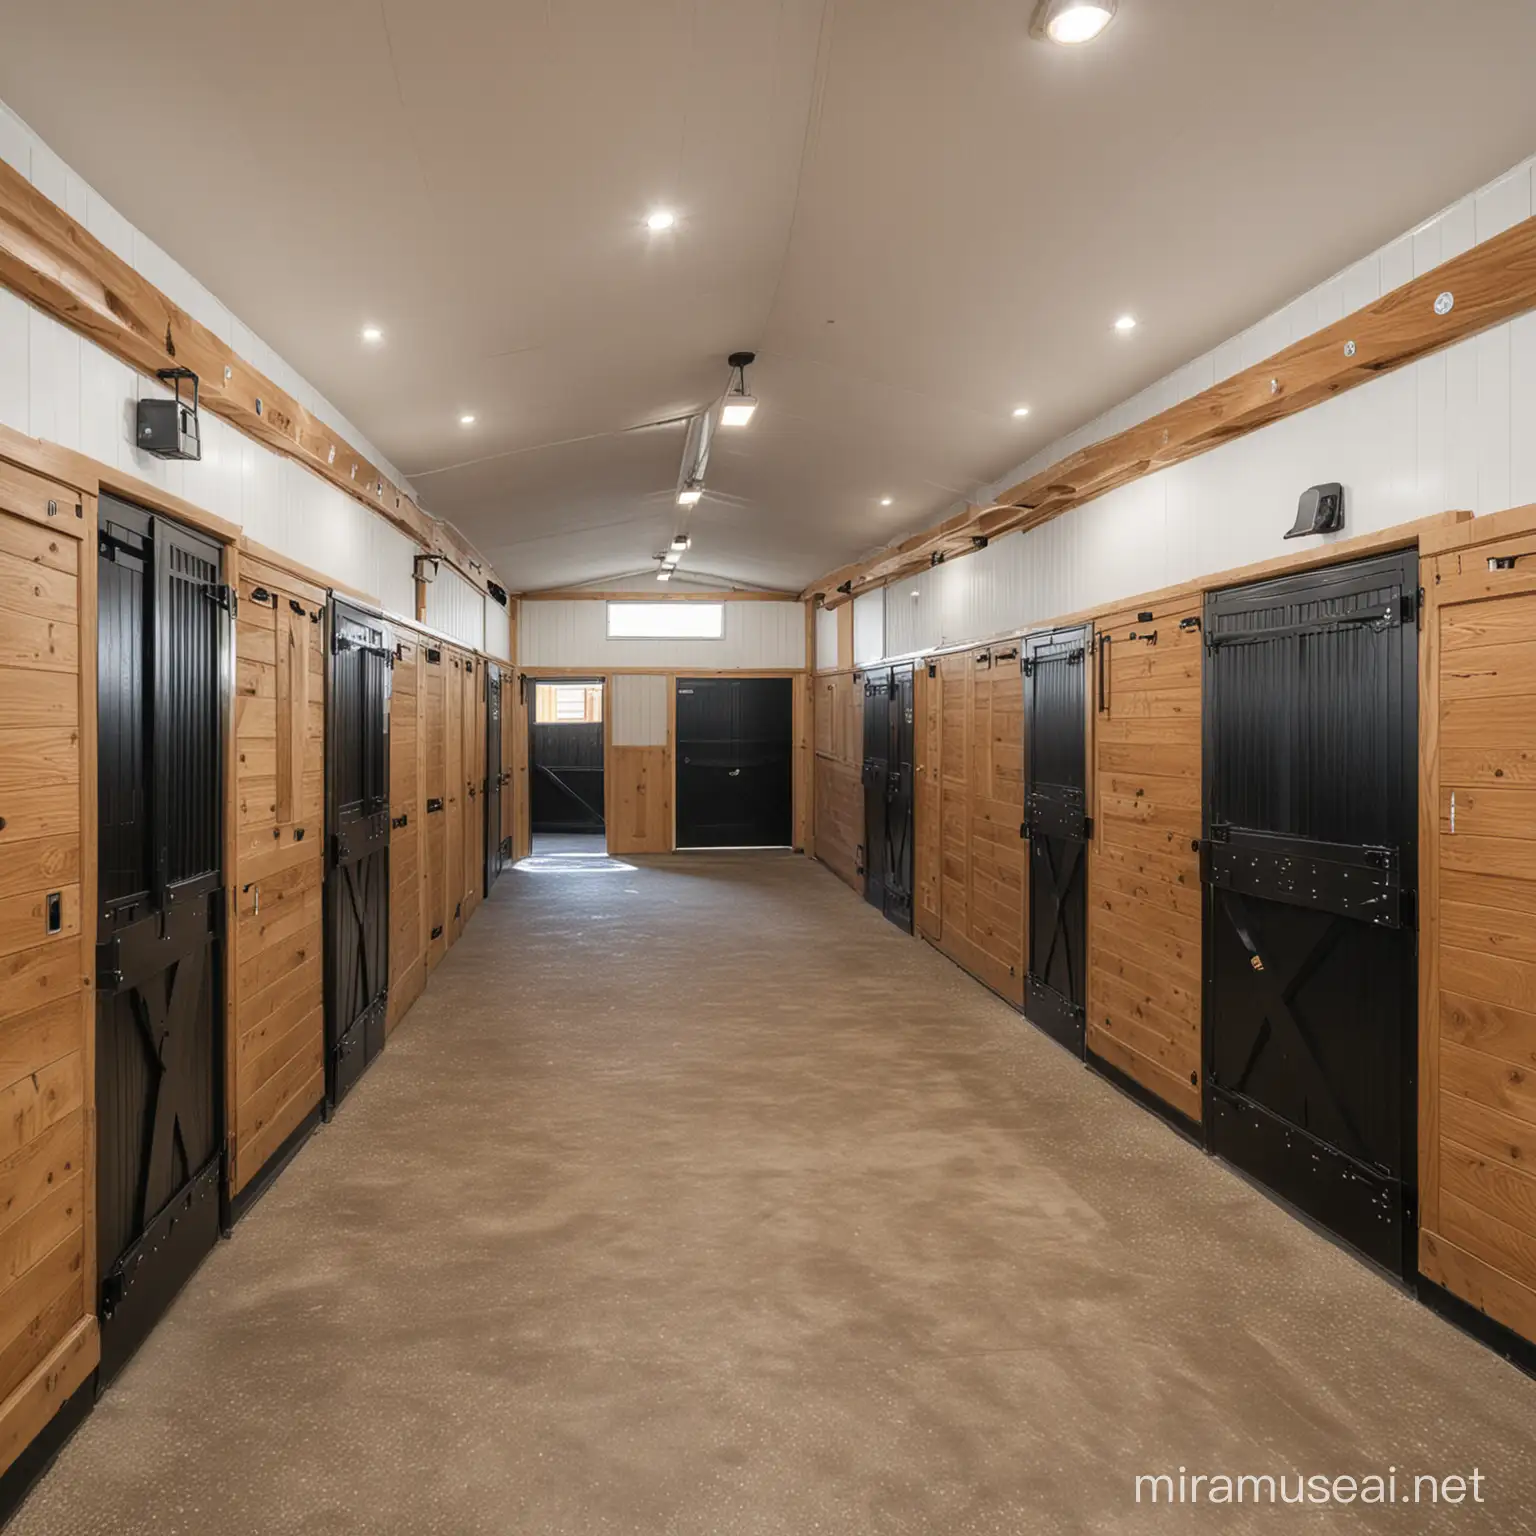 Calm and Quiet Horses: These stables typically feature spacious, well-ventilated box stalls with solid doors to provide privacy and tranquility for the horse. They are often located away from high-traffic or noisy areas.  luxury. oak wood. black hardware.